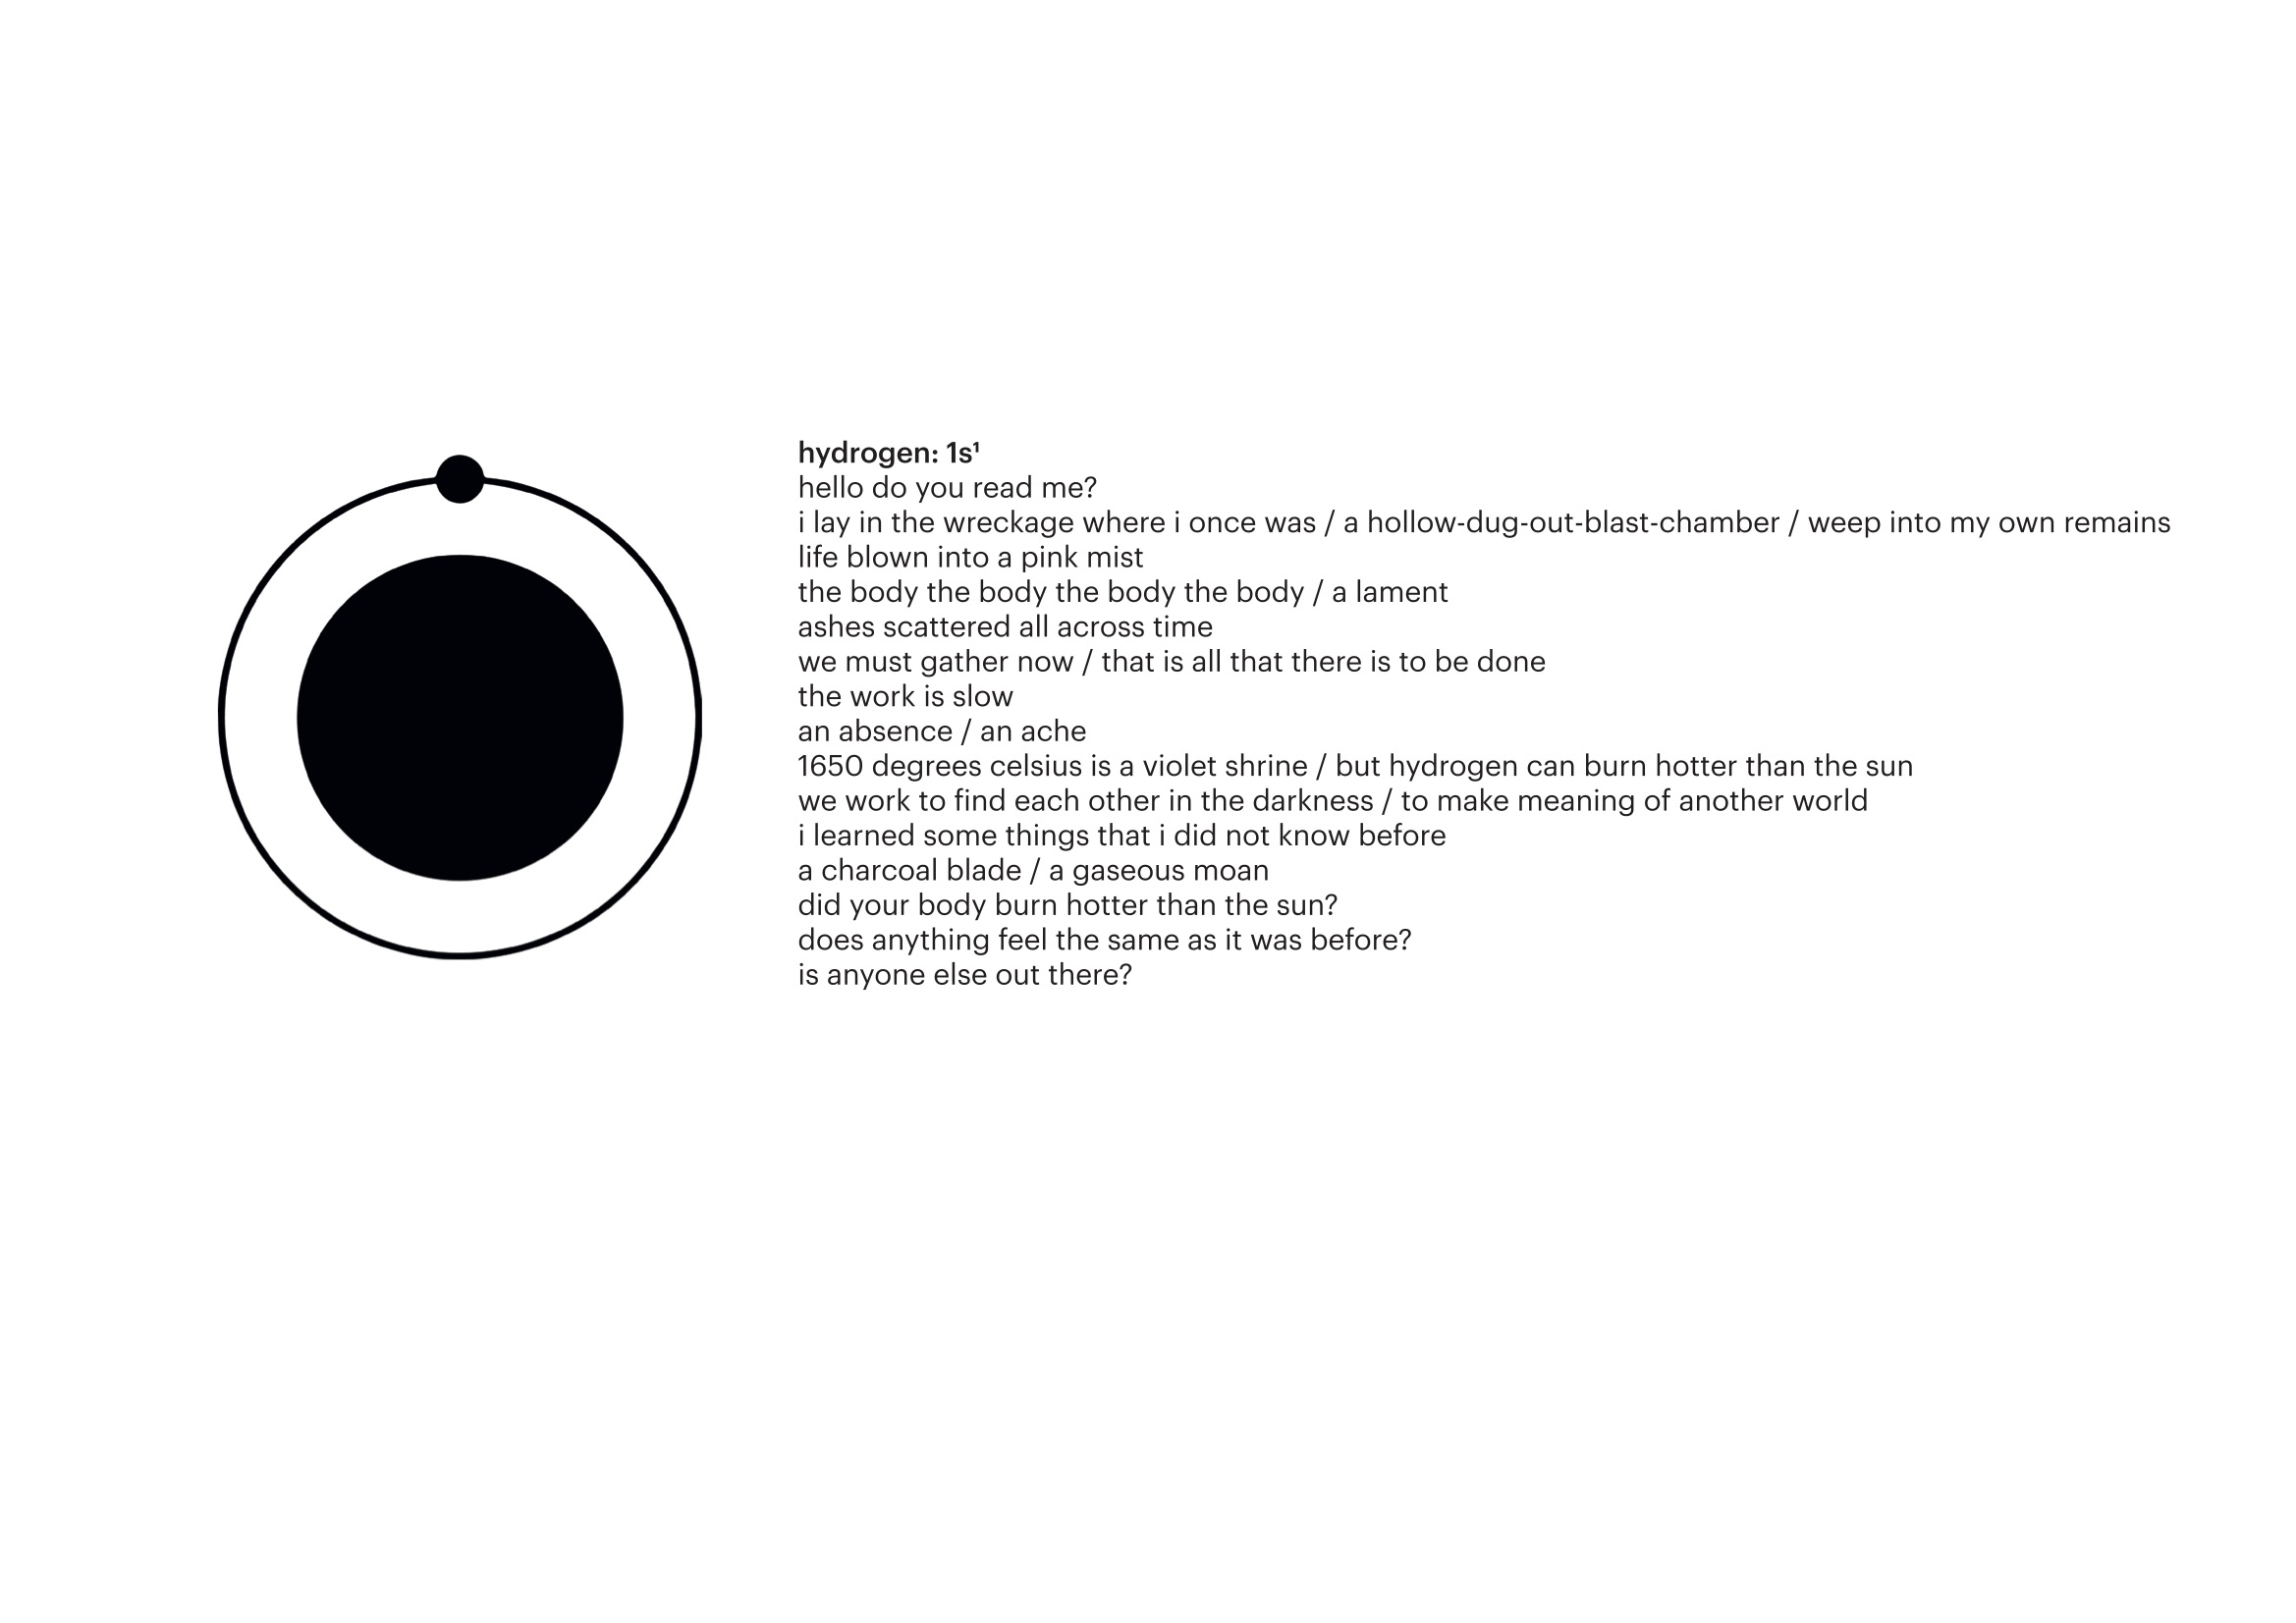 On the left is a black and white drawing of an oxygen atom. In bold font is the title:’oxygen: 1s22s22p4’. Underneath is the poem: ’hello do you read me?/ i lay in the wreckage where i once was / a hollow-dug-out-blast-chamber / weep into my own remains  life blown into a pink mist/ the body the body the body the body / a lament/ ashes scattered all across time  
                we must gather now / that is all that there is to be done/ the work is slow/ an absence / an ache/ 1650 degrees celsius is a violet shrine / but hydrogen can burn hotter than the sun/ we work to find each other in the darkness / to make meaning of another world/ i learned some things that i did not know before/ a charcoal blade / a gaseous moan/ did your body burn hotter than the sun?/ does anything feel the same as it was before?/ is anyone else out there?